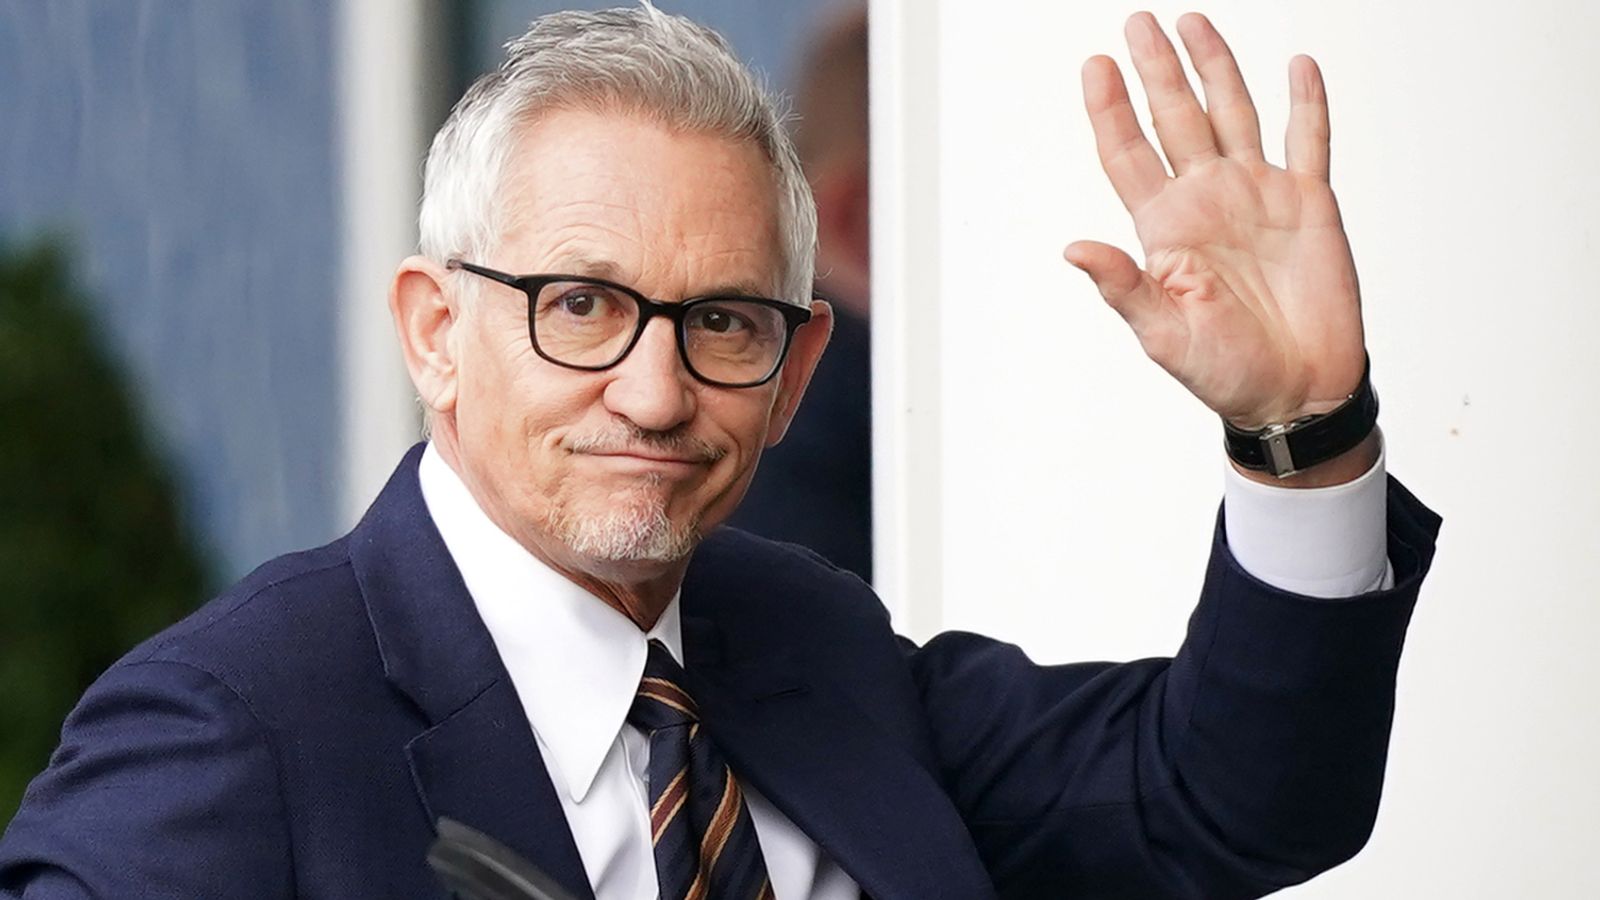 Gary Lineker row: BBC 'working very hard' to find solution, director general Tim Davie says